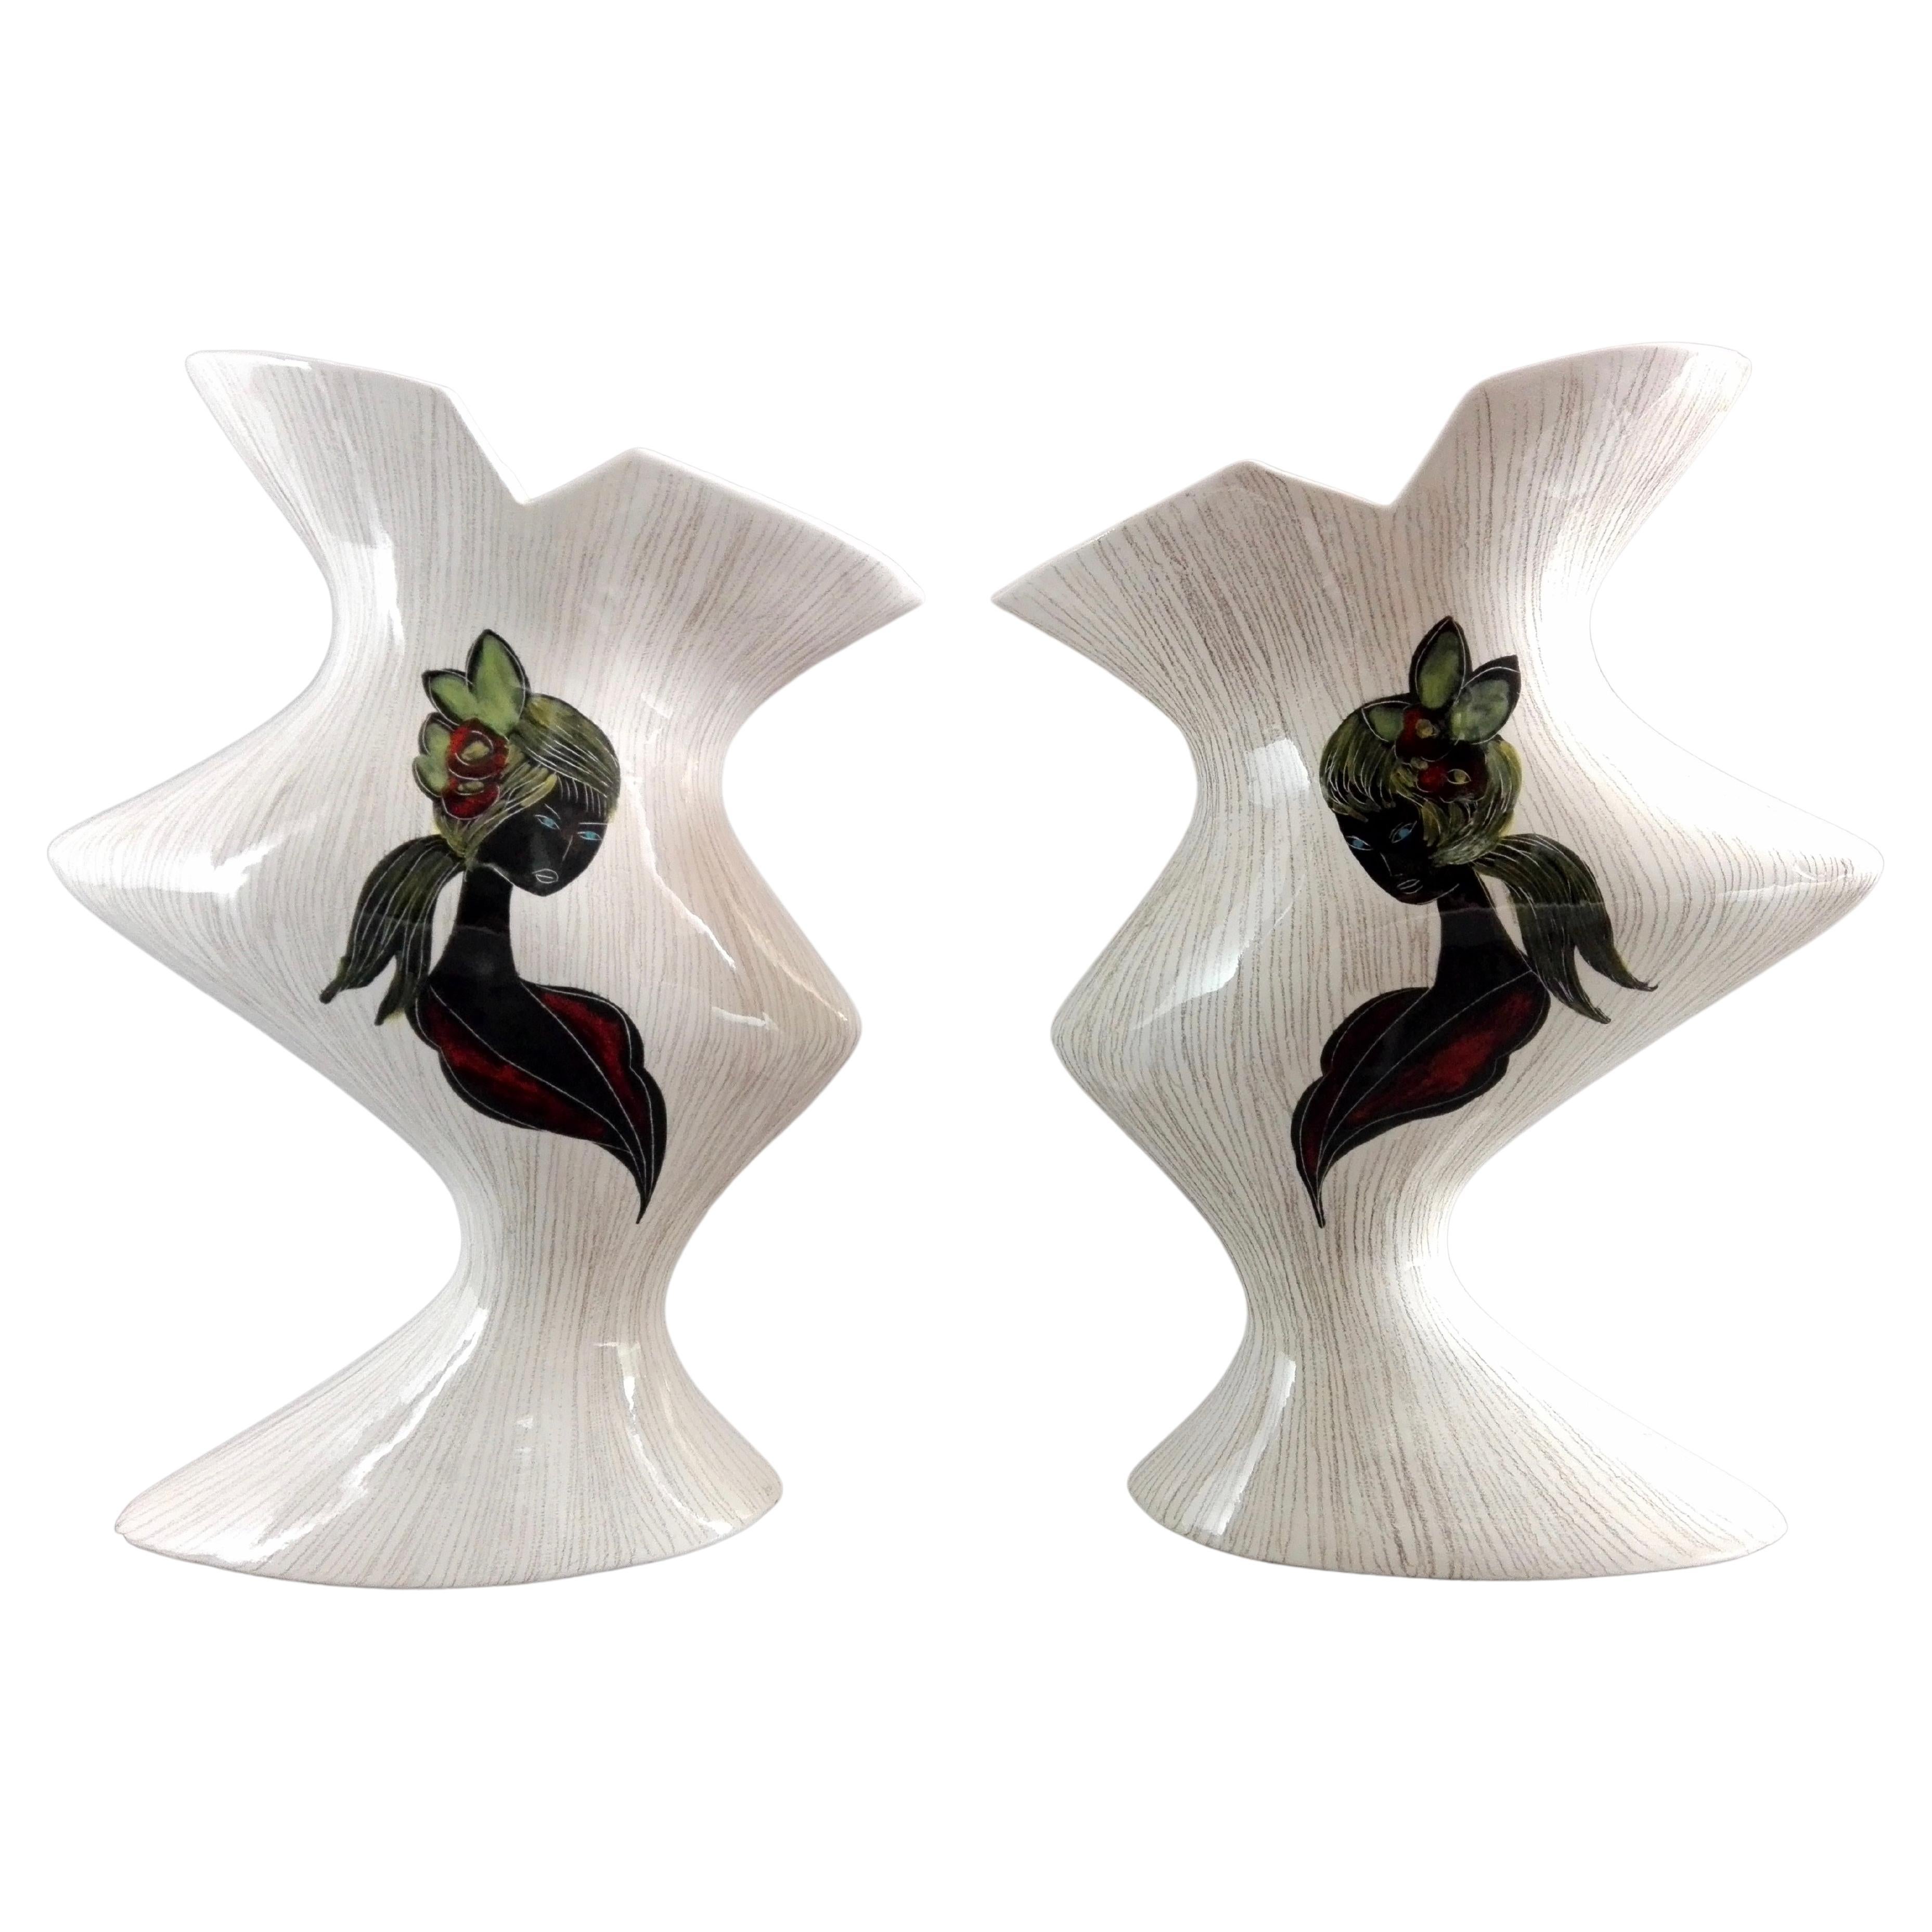 1950s Italian Ceramic Vintage Asymmetrical Decorated Vases, a Pair For Sale